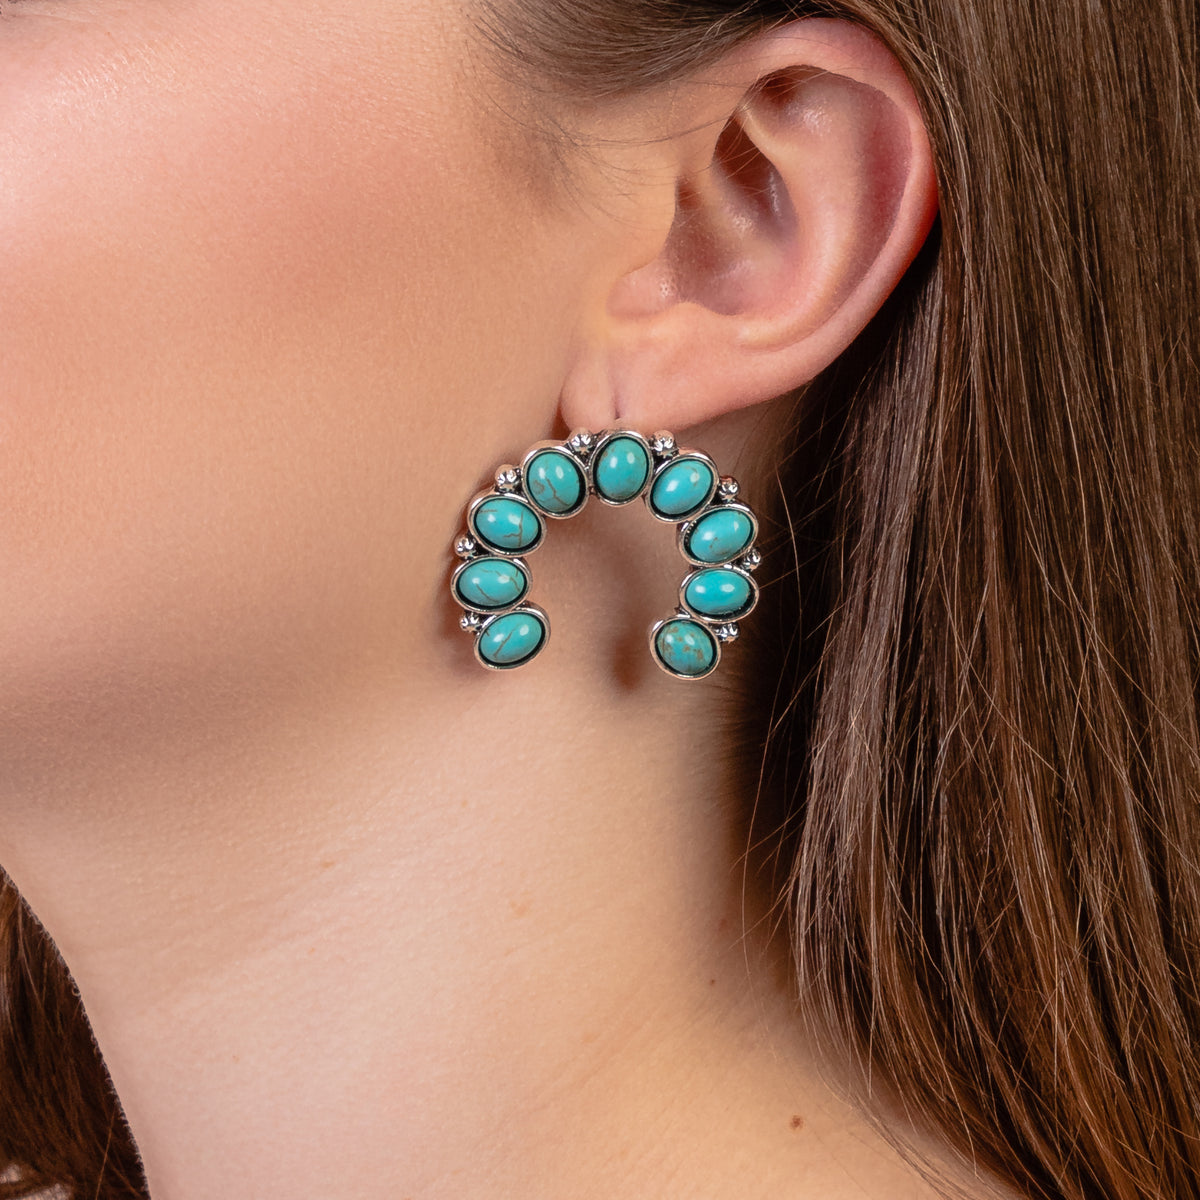 93178 - Squash Blossom Earrings - Turquoise & Silver